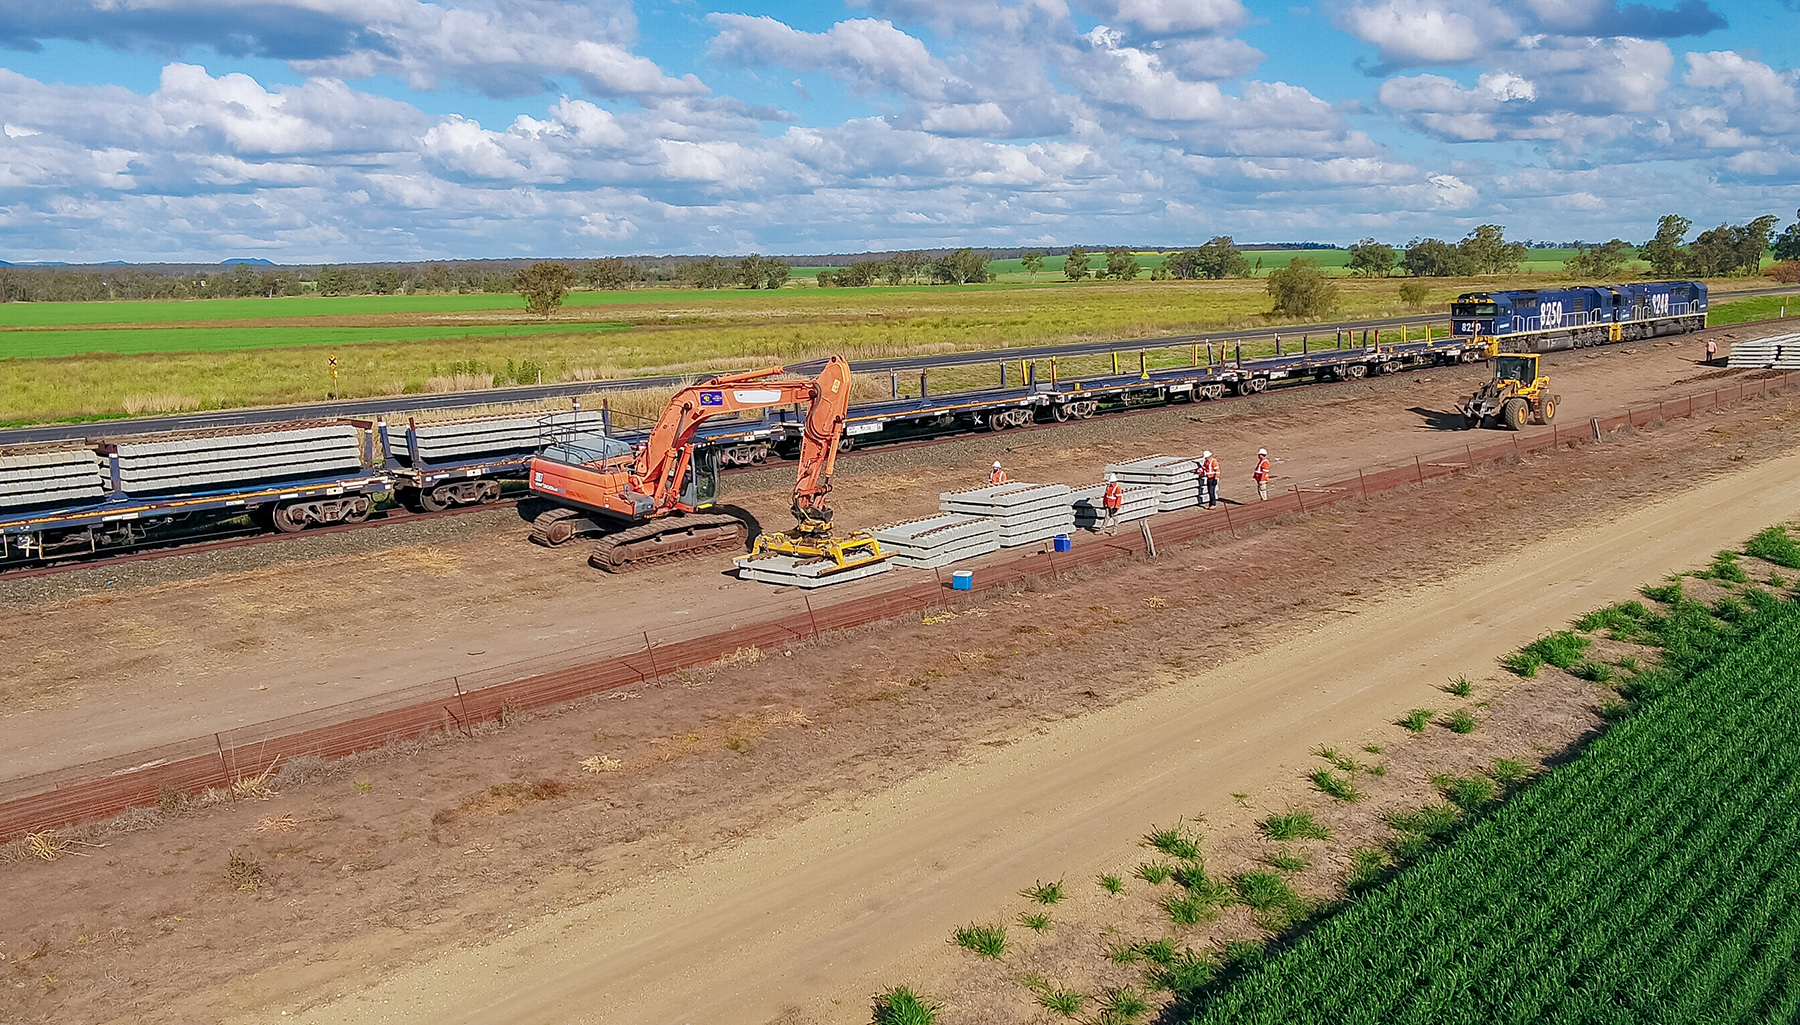 Rail and sleepers have been delivered for the beginning of construction on the Narrabri to North Star section of Inland Rail